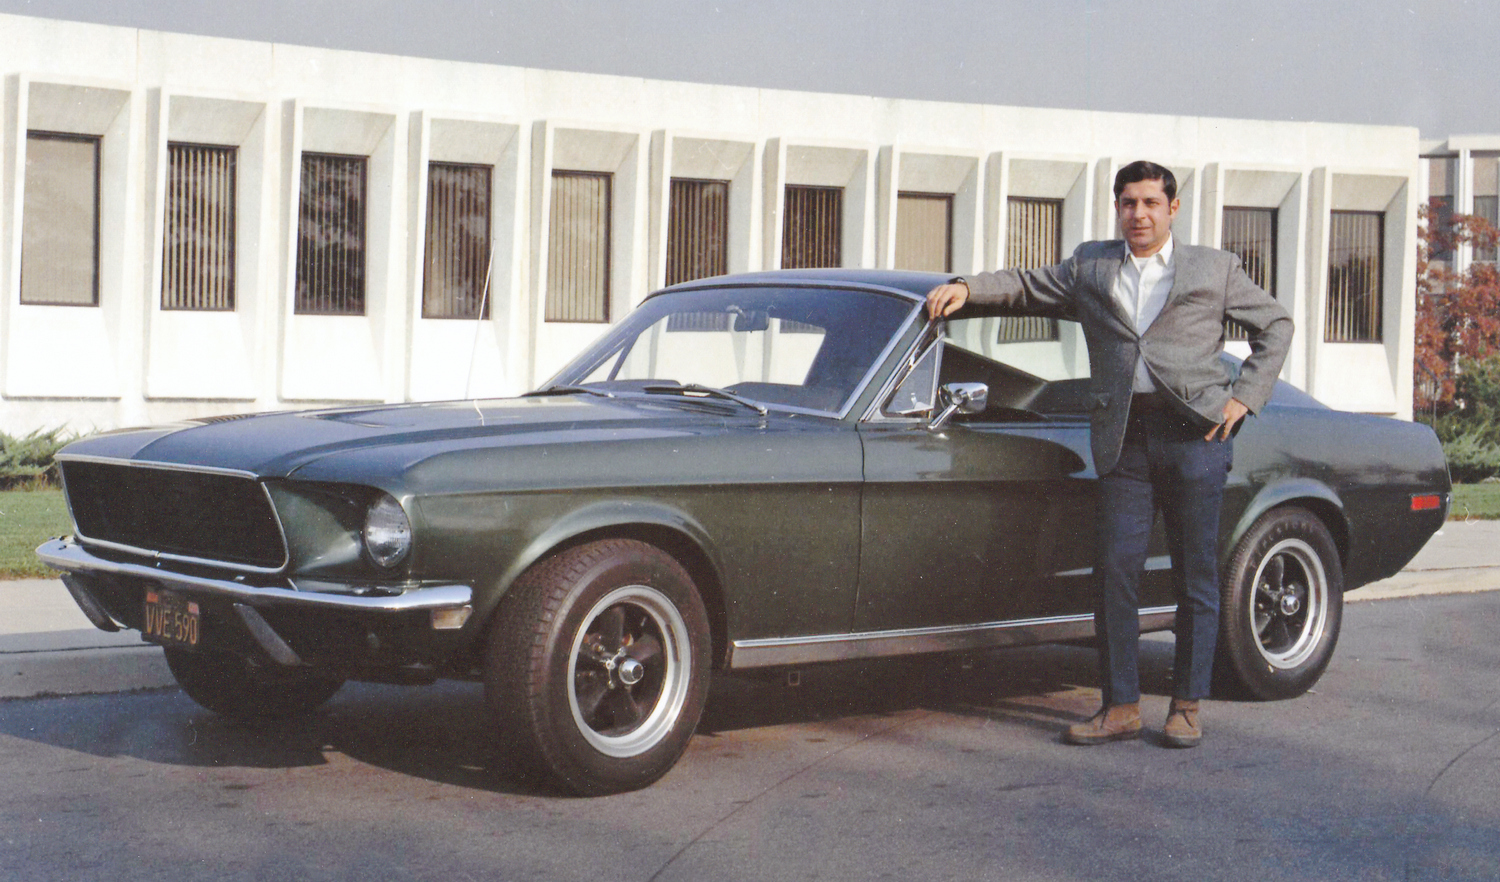   Bullitt 559's second owner, Frank Marranca, proudly poses for some of the only photos ever made public of the car post-movie, circa 1973.    Property Frank Marranca   